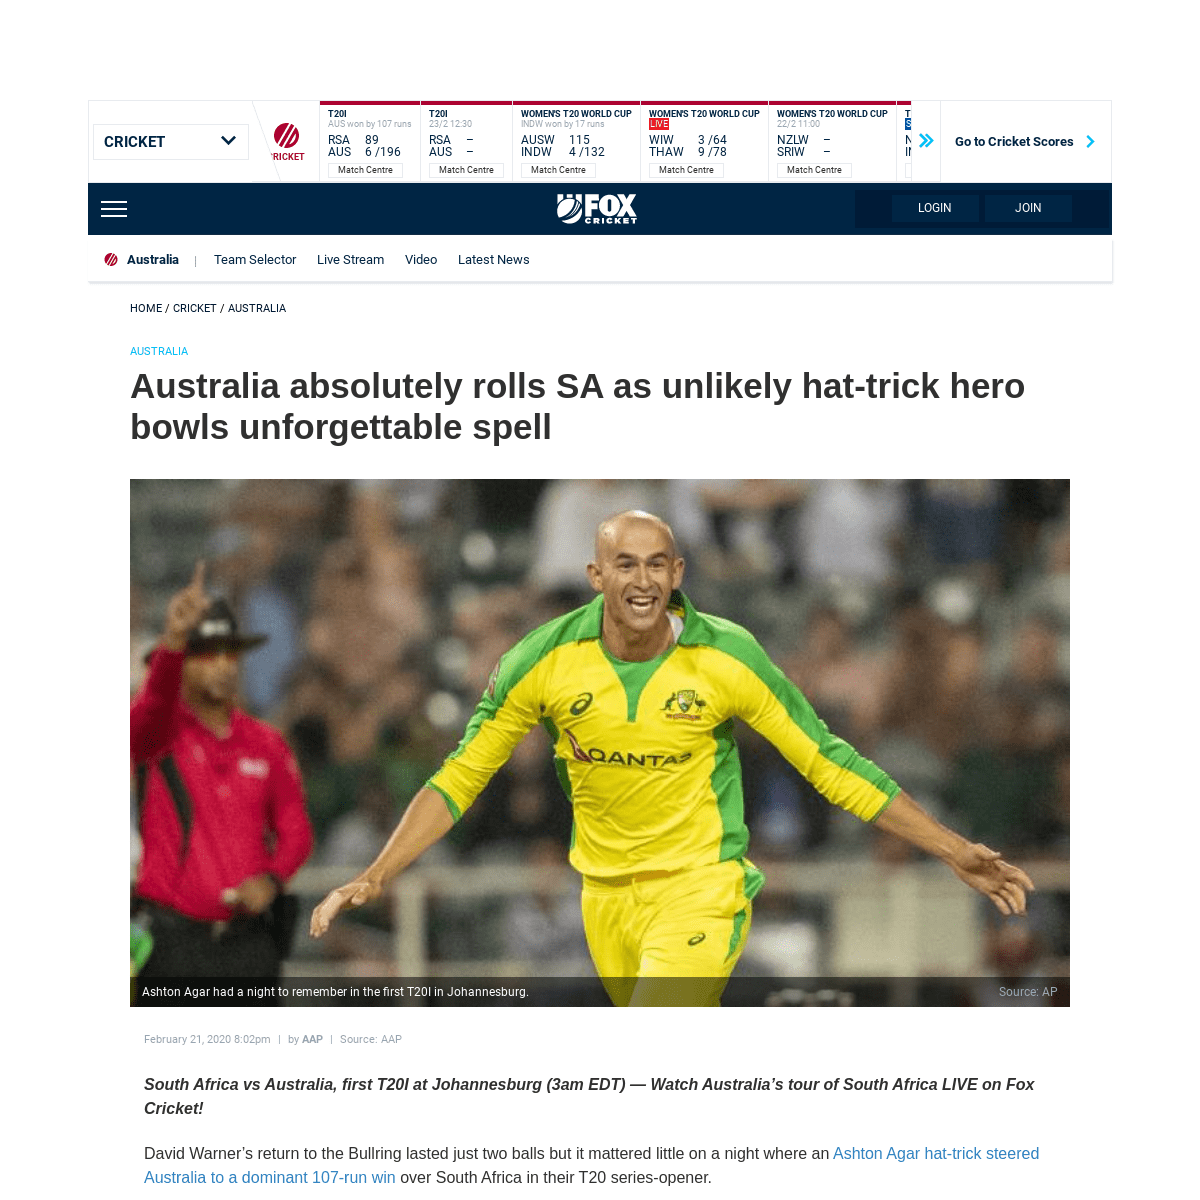 A complete backup of www.foxsports.com.au/cricket/australia/cricket-australia-vs-south-africa-first-t20-live-scores-start-time-h